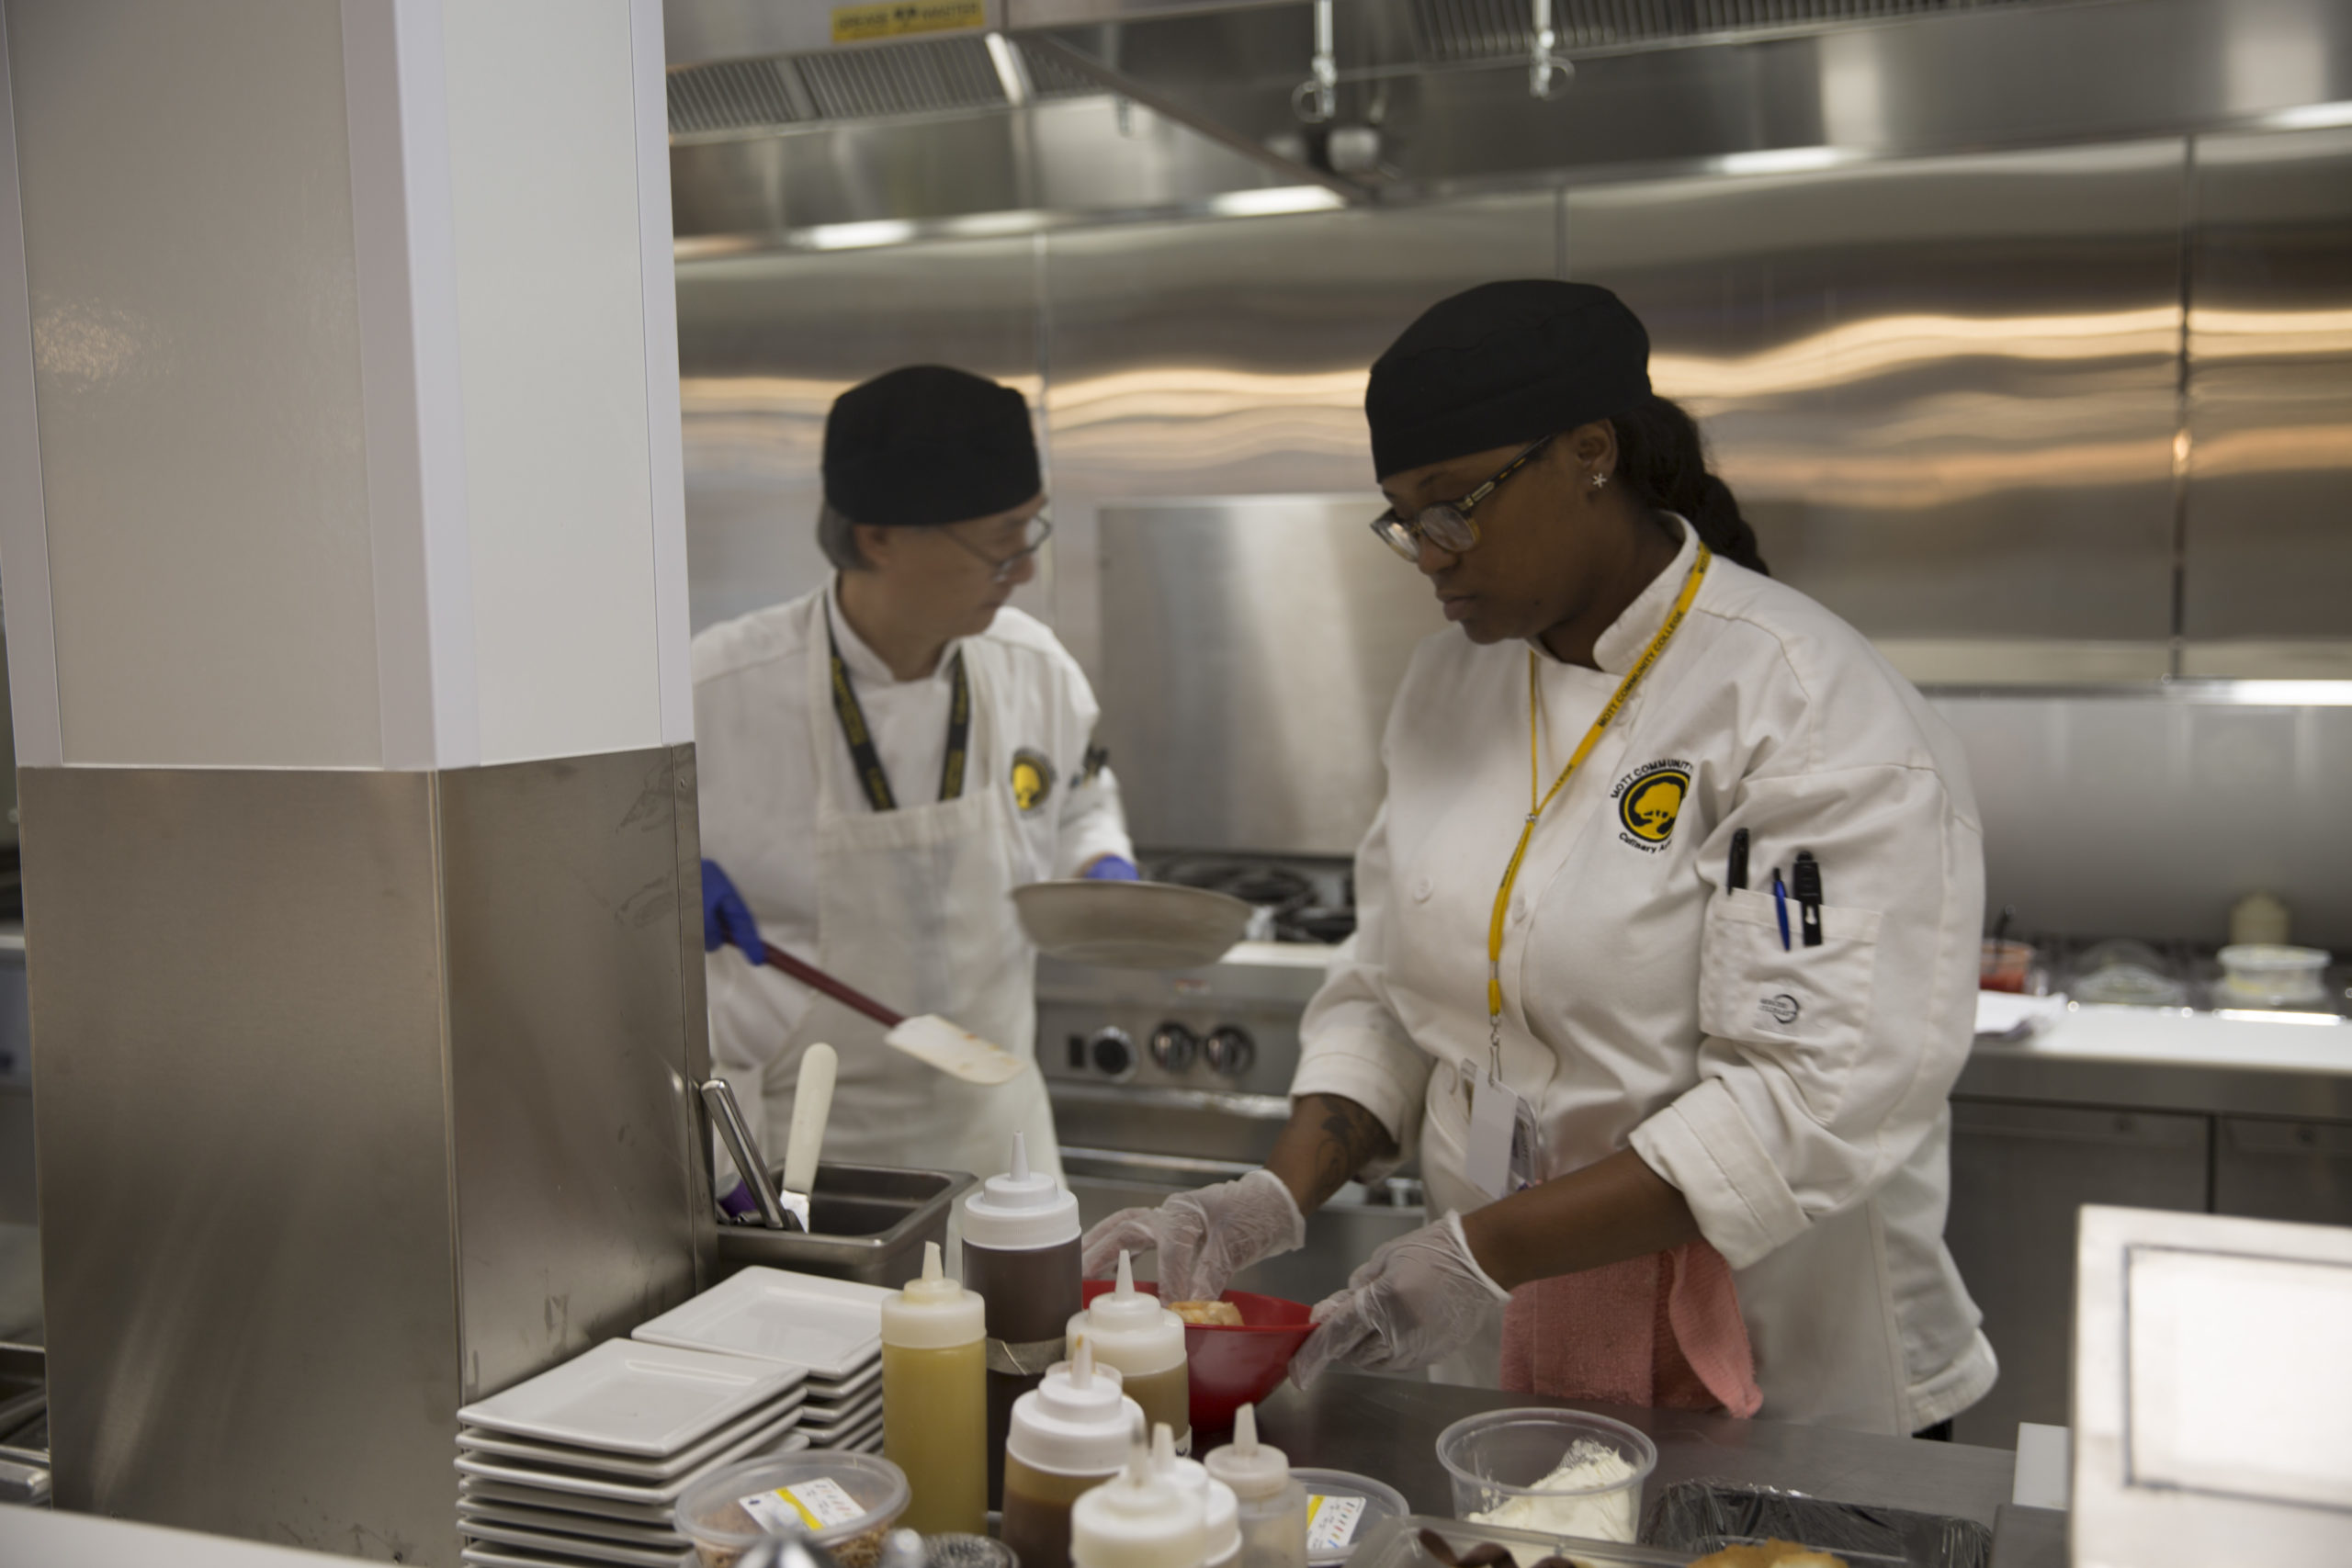 Two students of Mott Culinary school working in kitchen